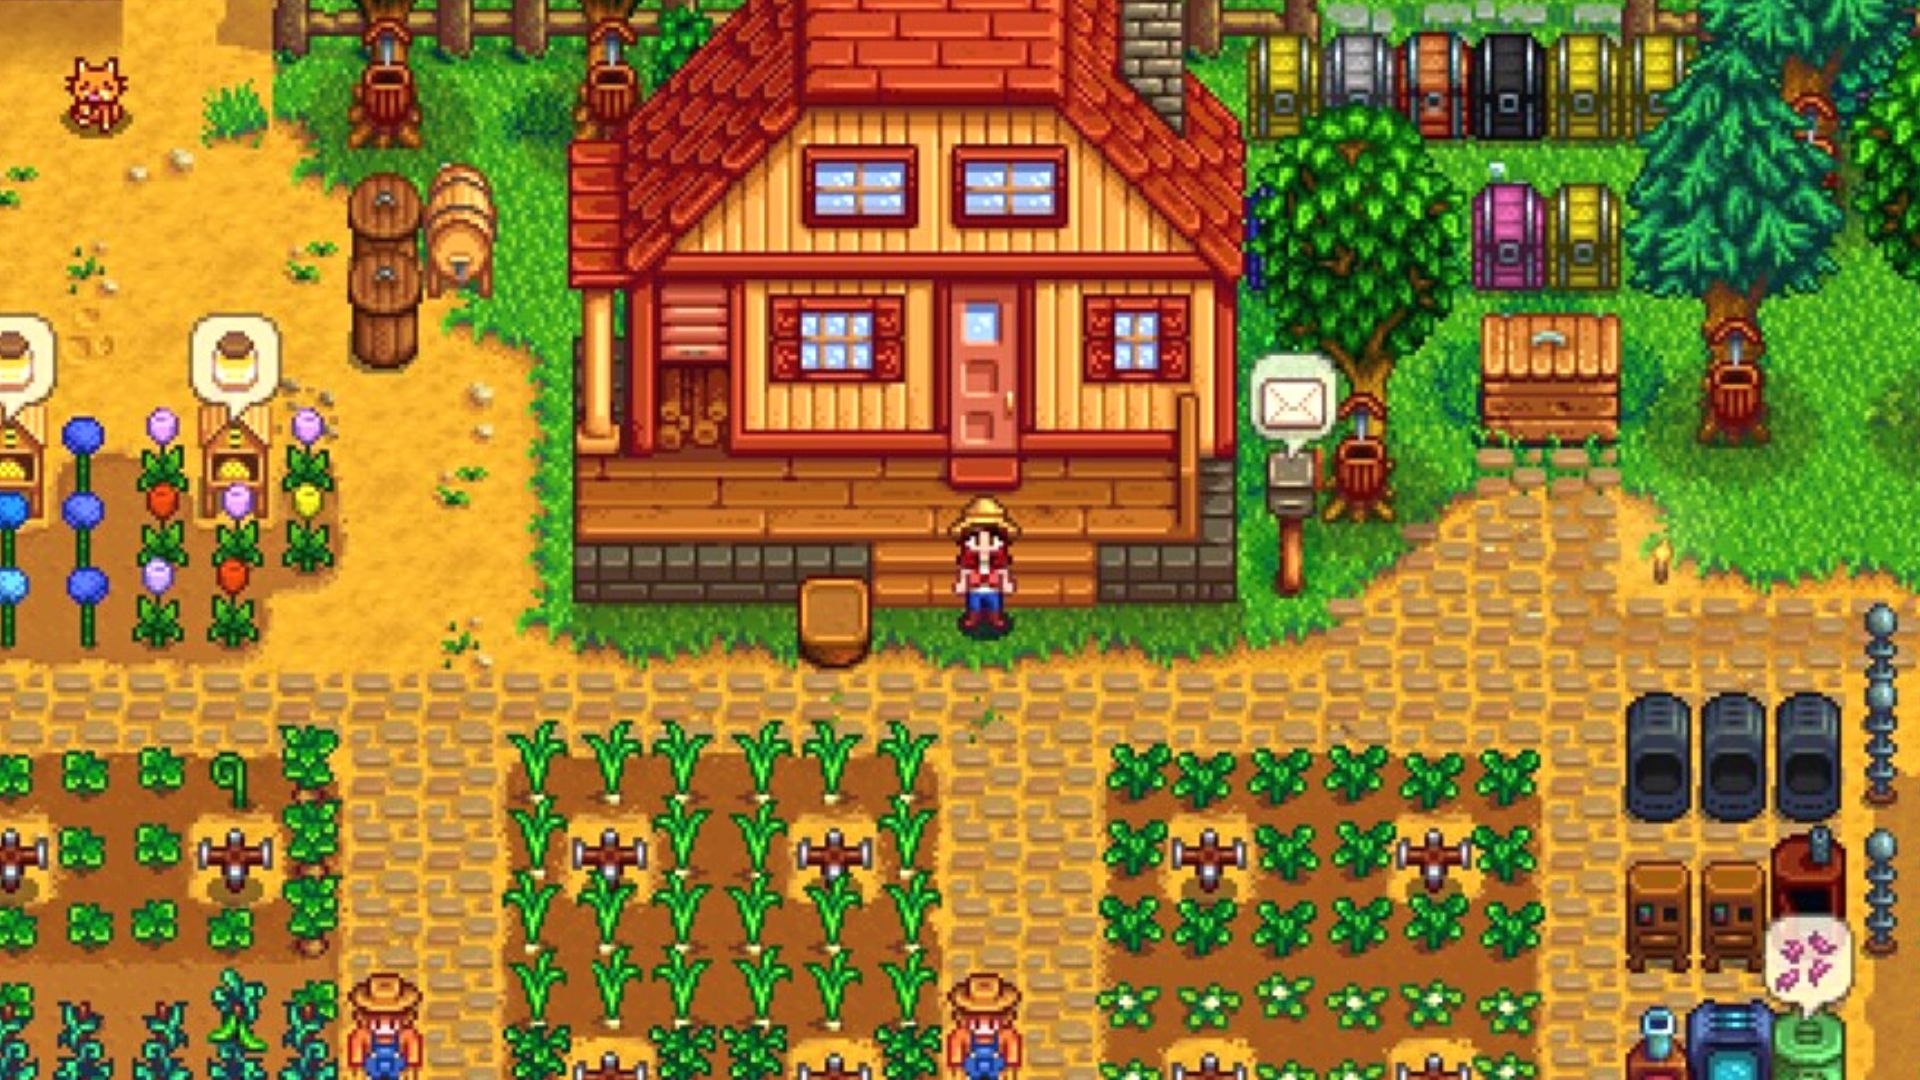 Stardew Valley' is getting an update with 'new game content